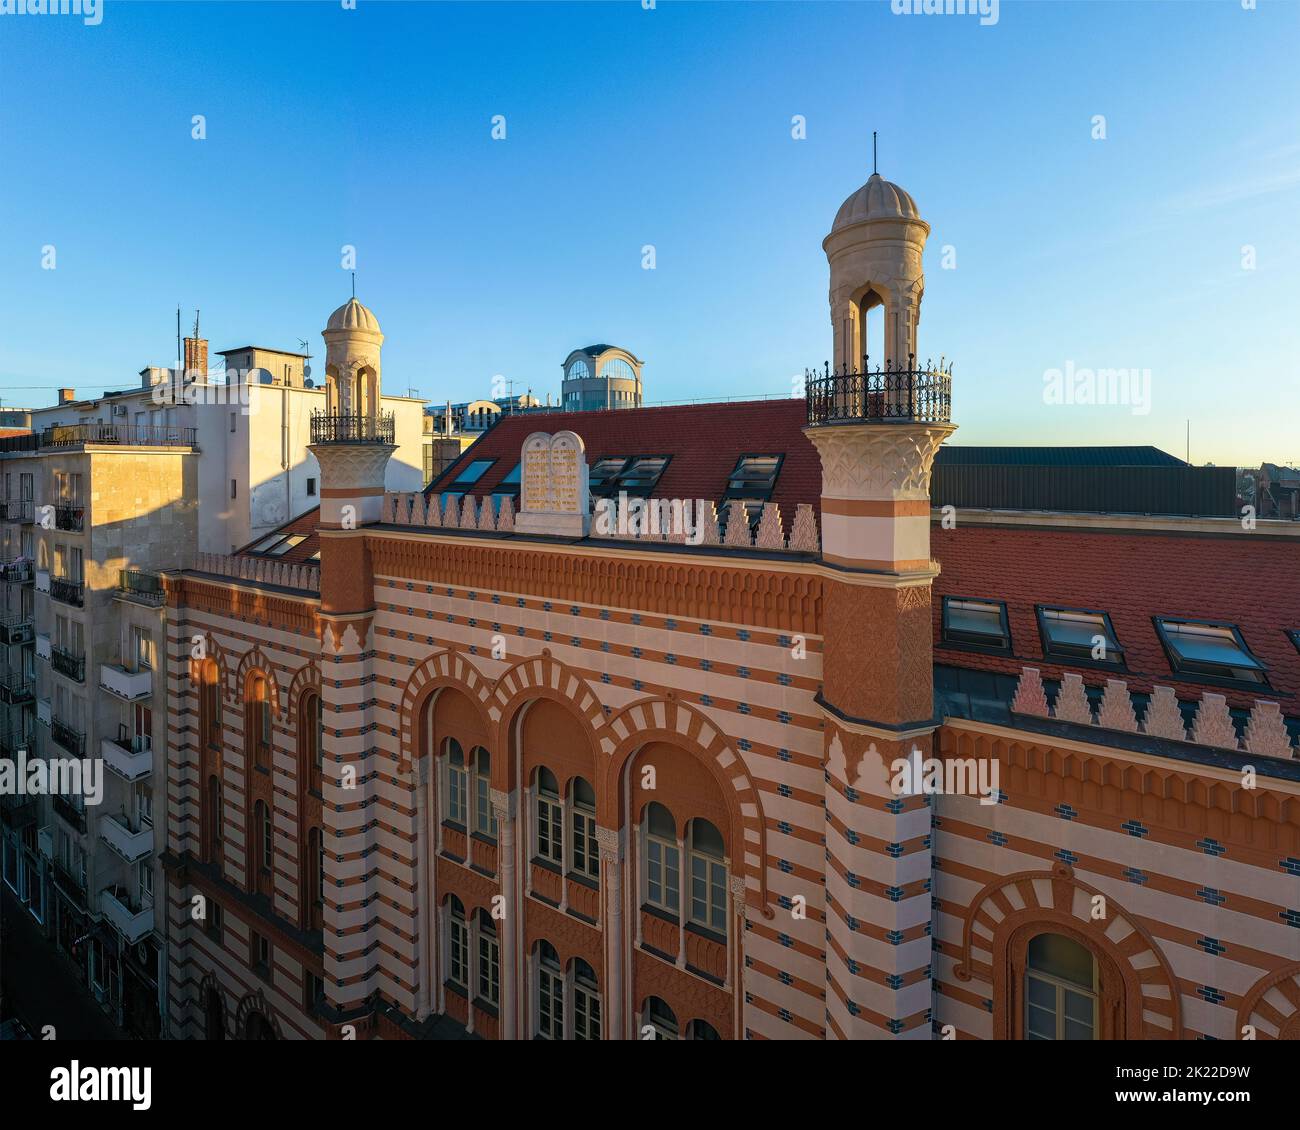 Rumbach sebestyen Street Synagogue aerial view. Near by   the famous Dohany street synagogue. amazing renewef space. Built in 1870-73. designed the ar Stock Photo